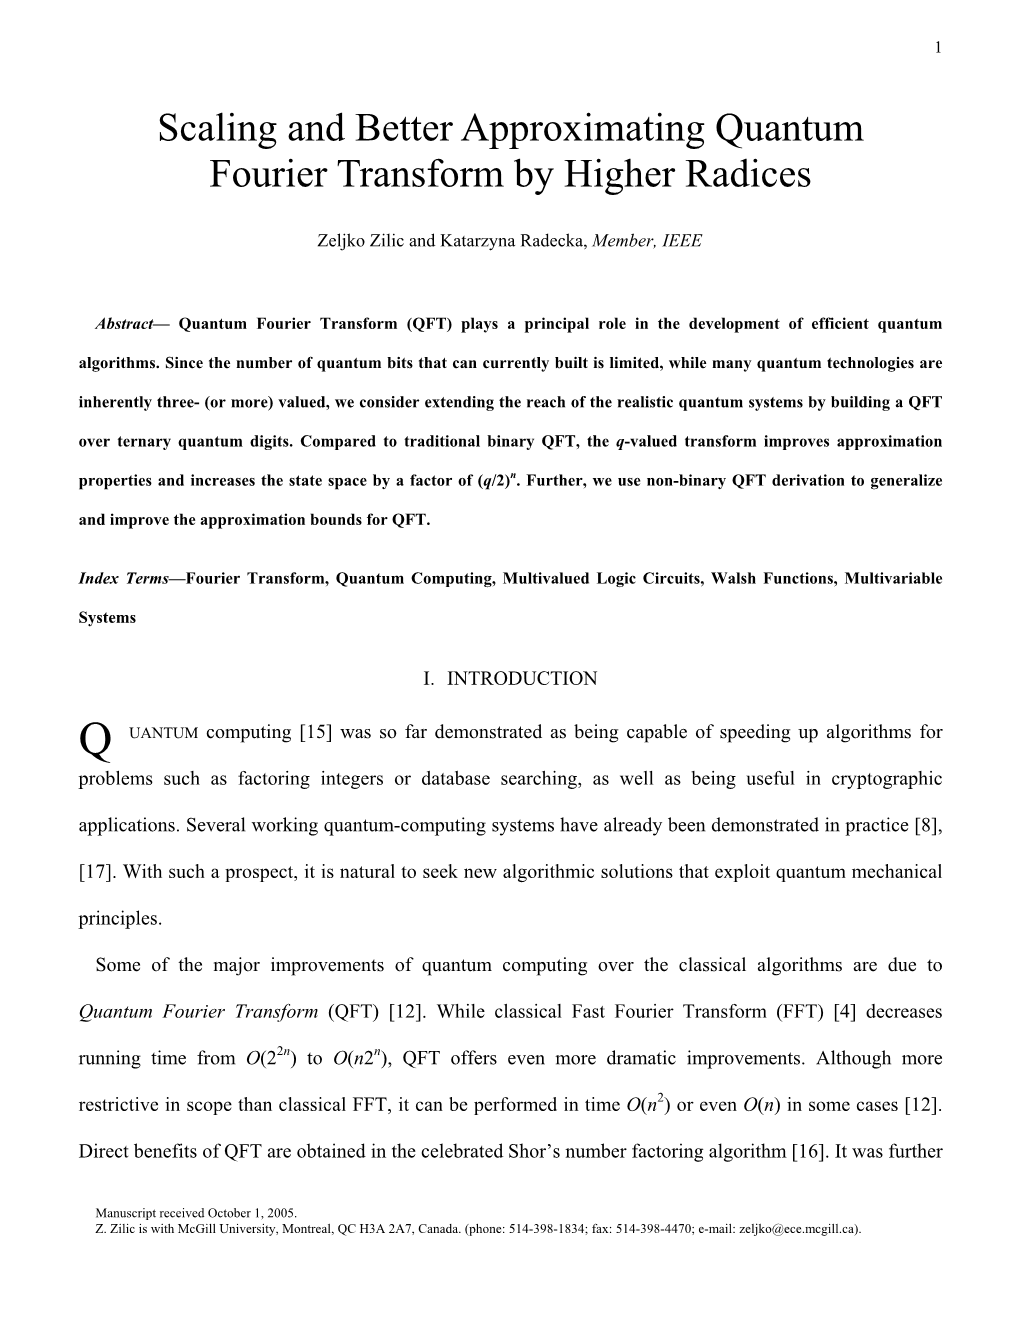 Scaling and Better Approximating Quantum Fourier Transform by Higher Radices